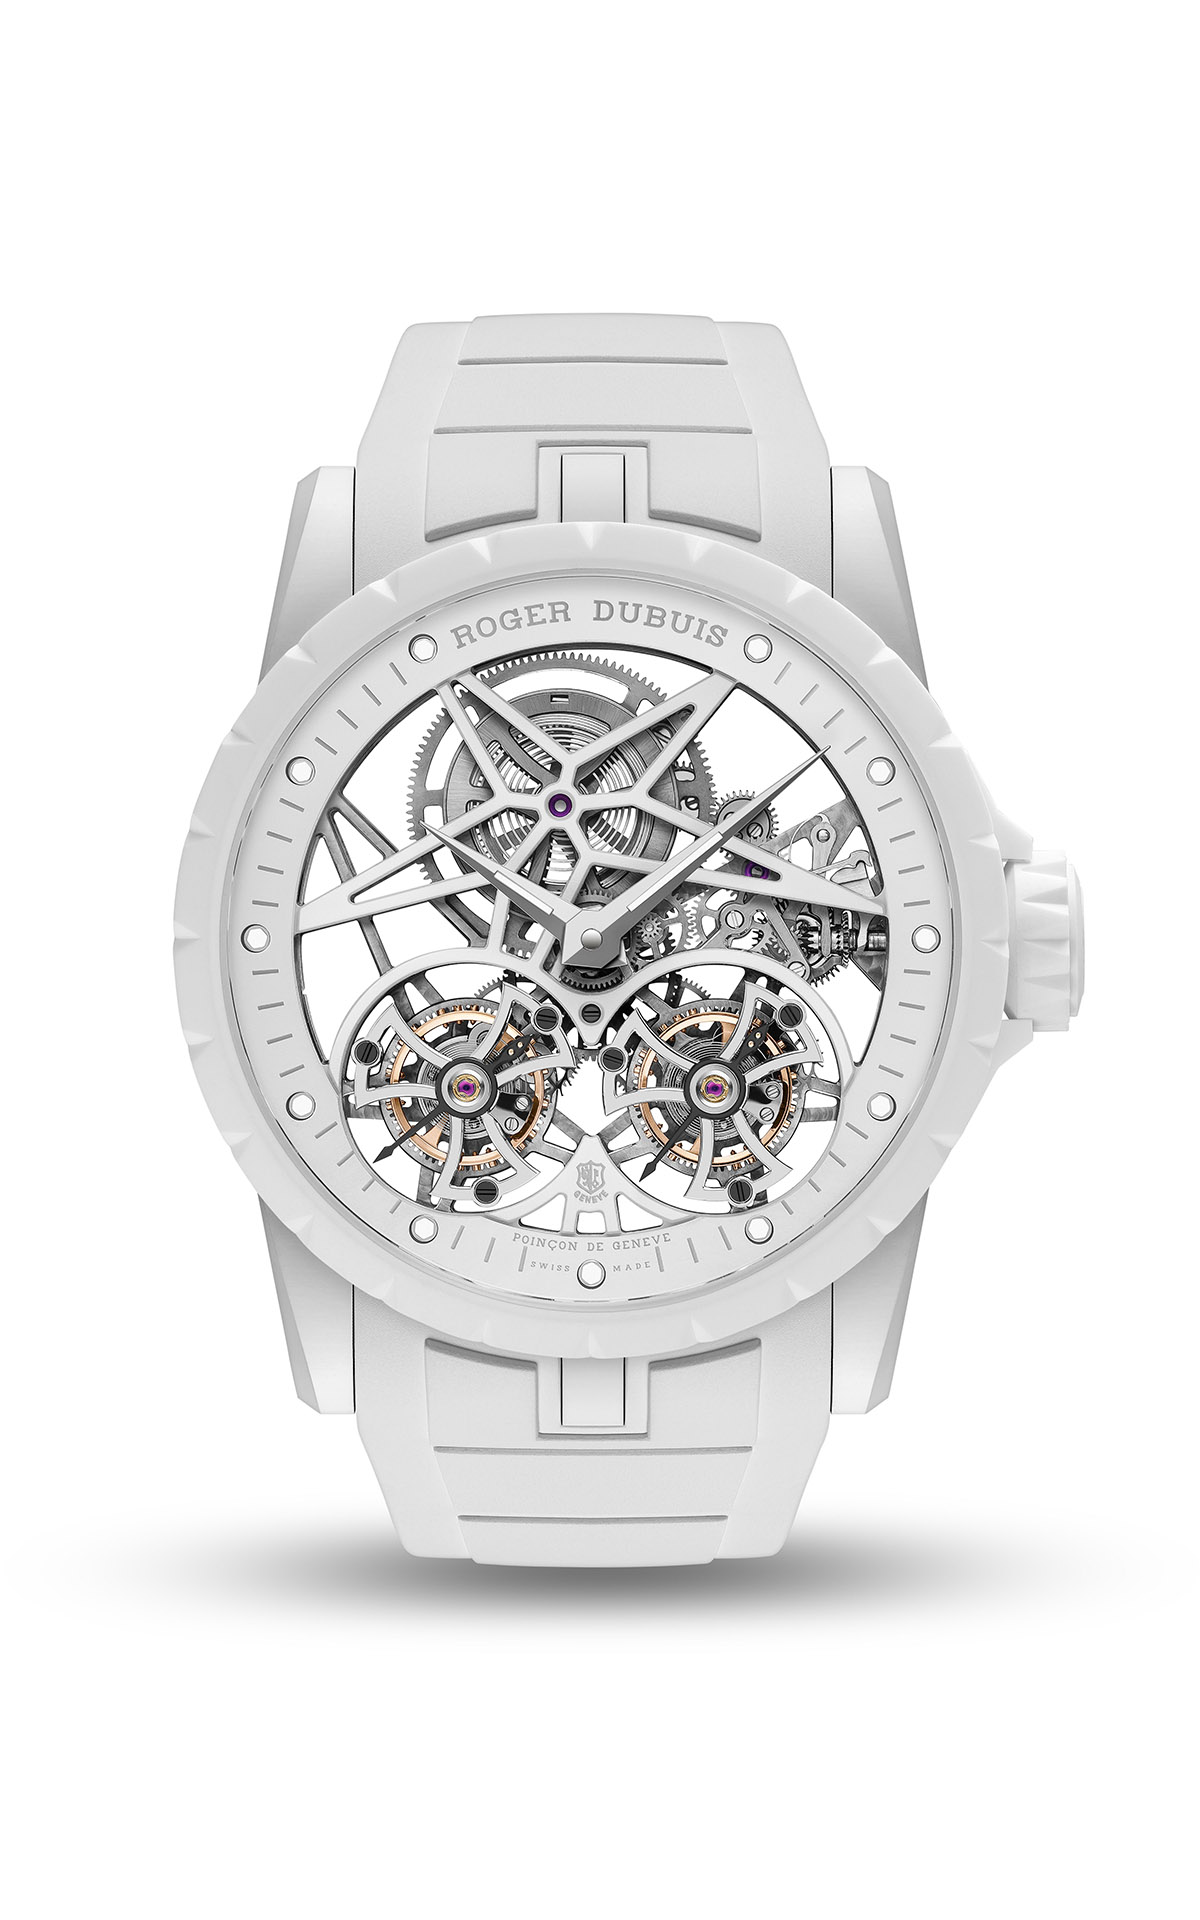 Roger Dubuis Excalibur Twofold frontal blanco fx